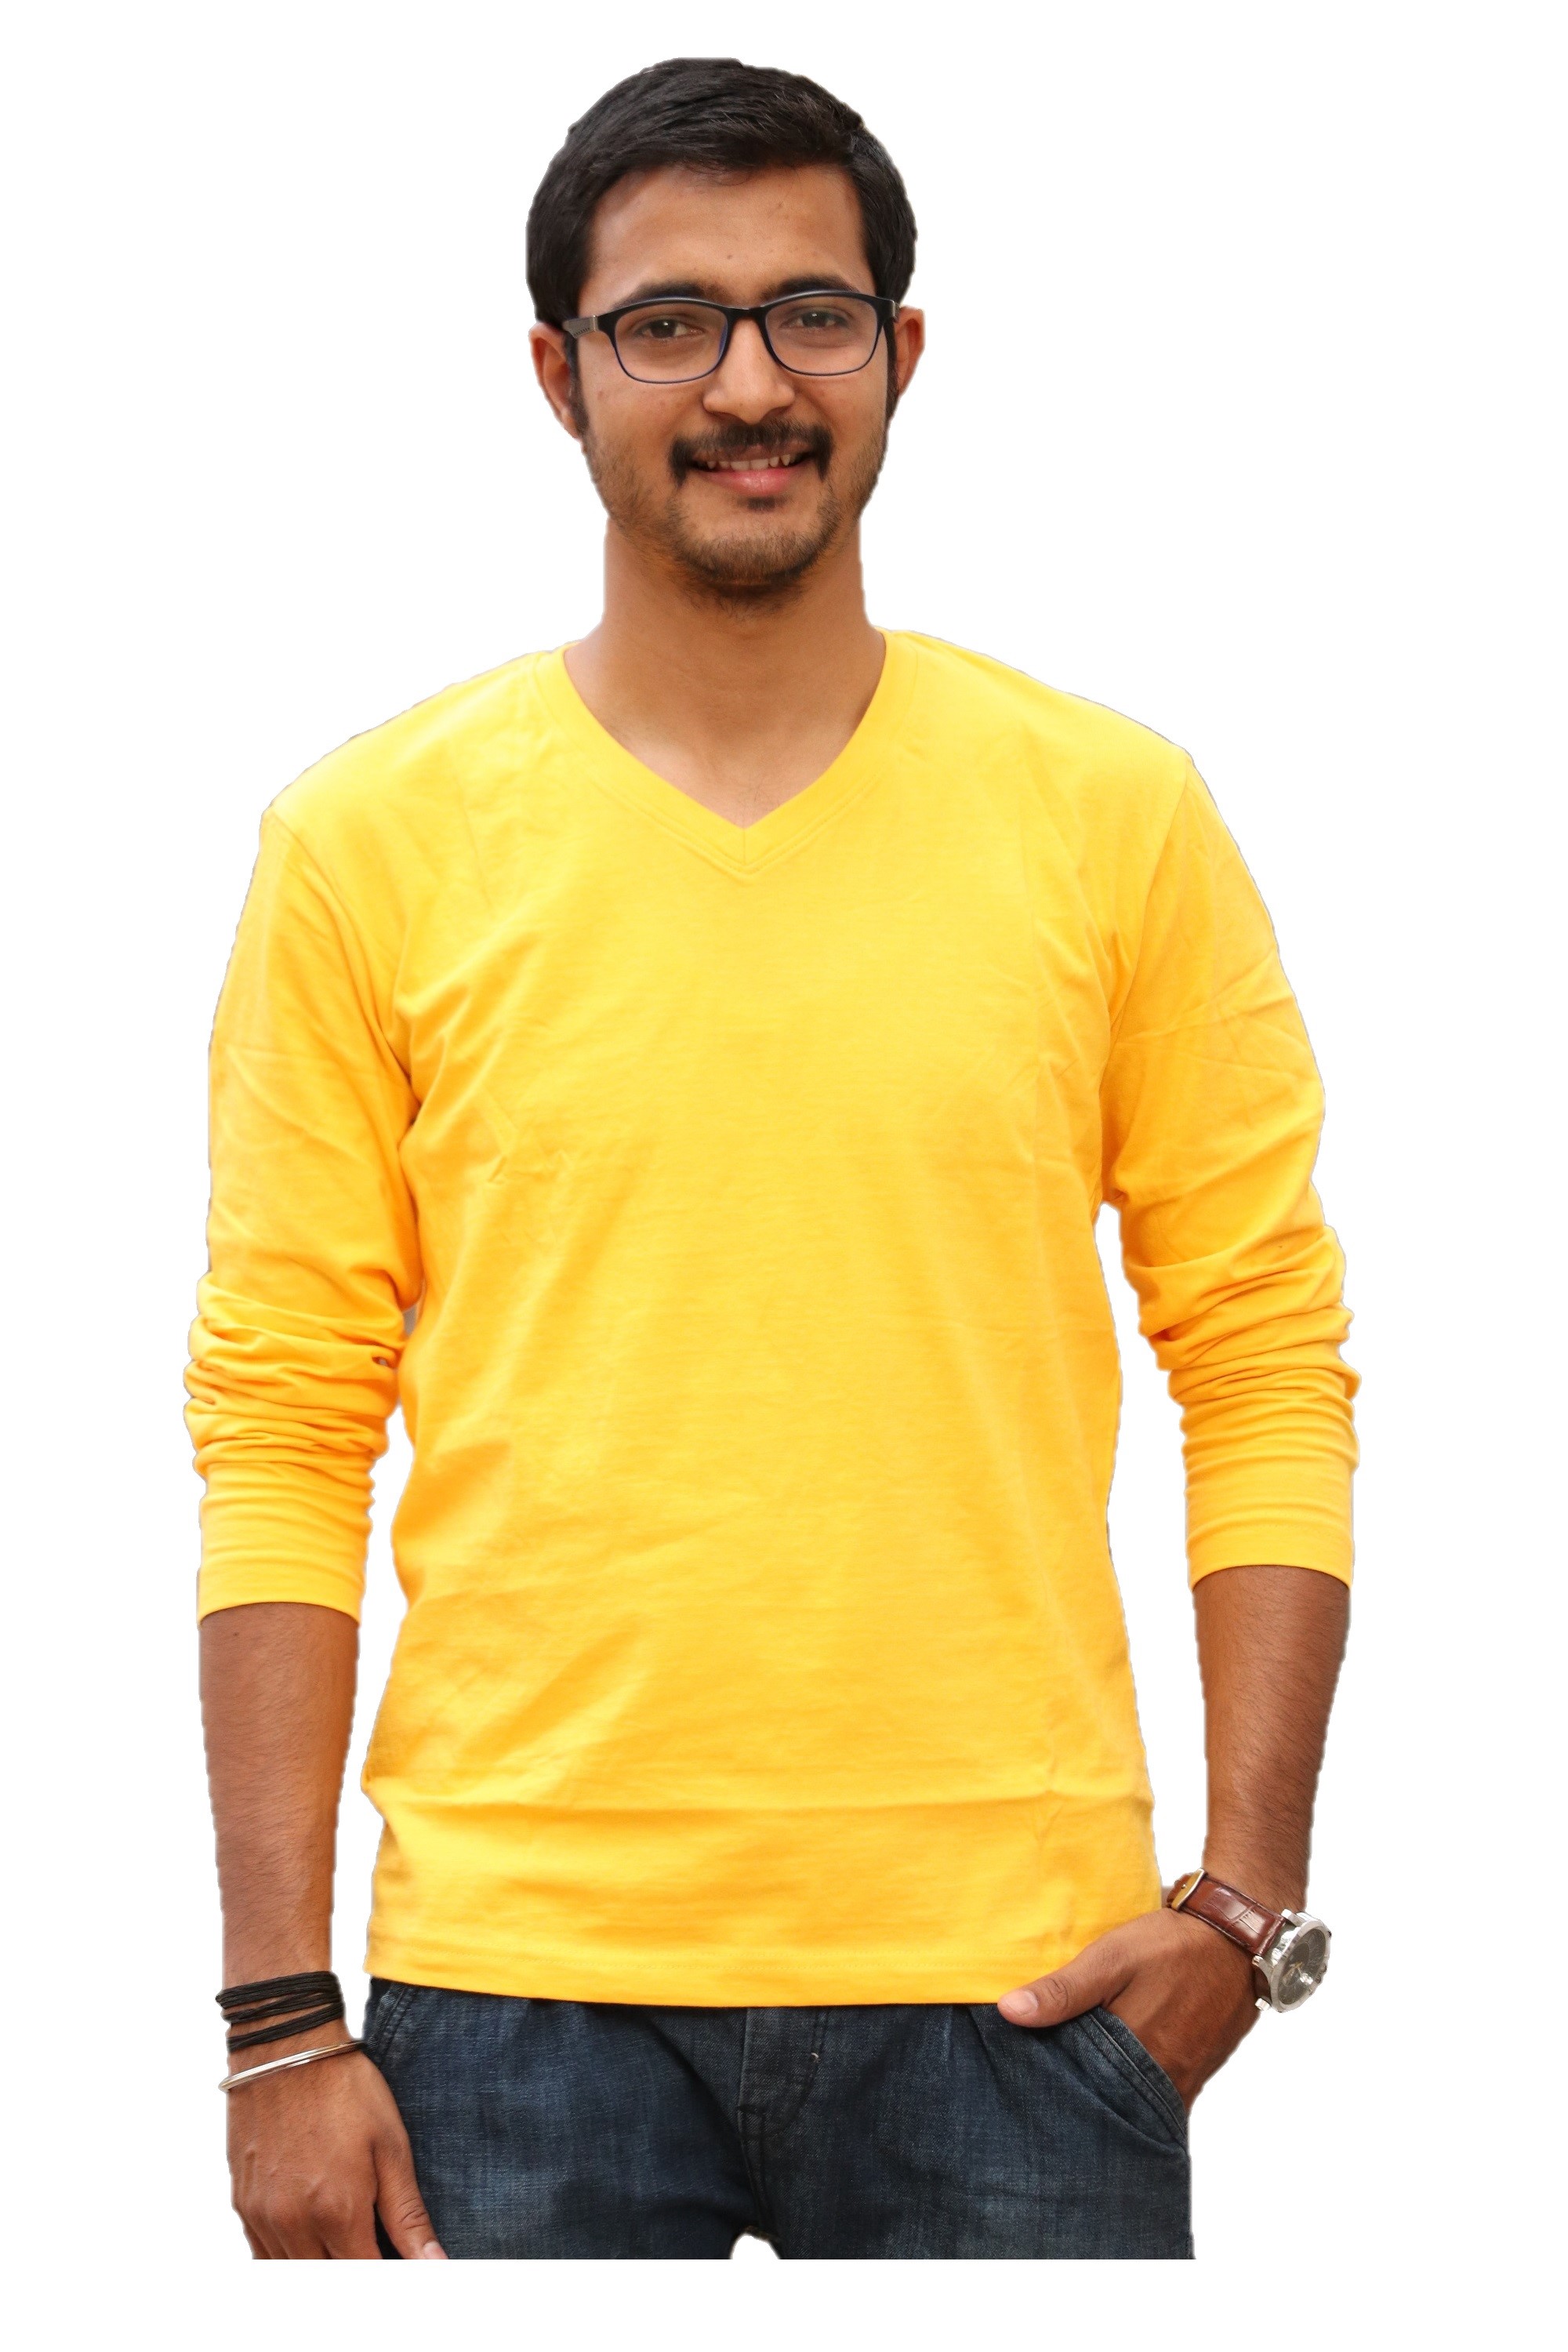 Buy Men'S Cotton V-Neck T-Shirt - Yellow Online @ ₹599 from ShopClues